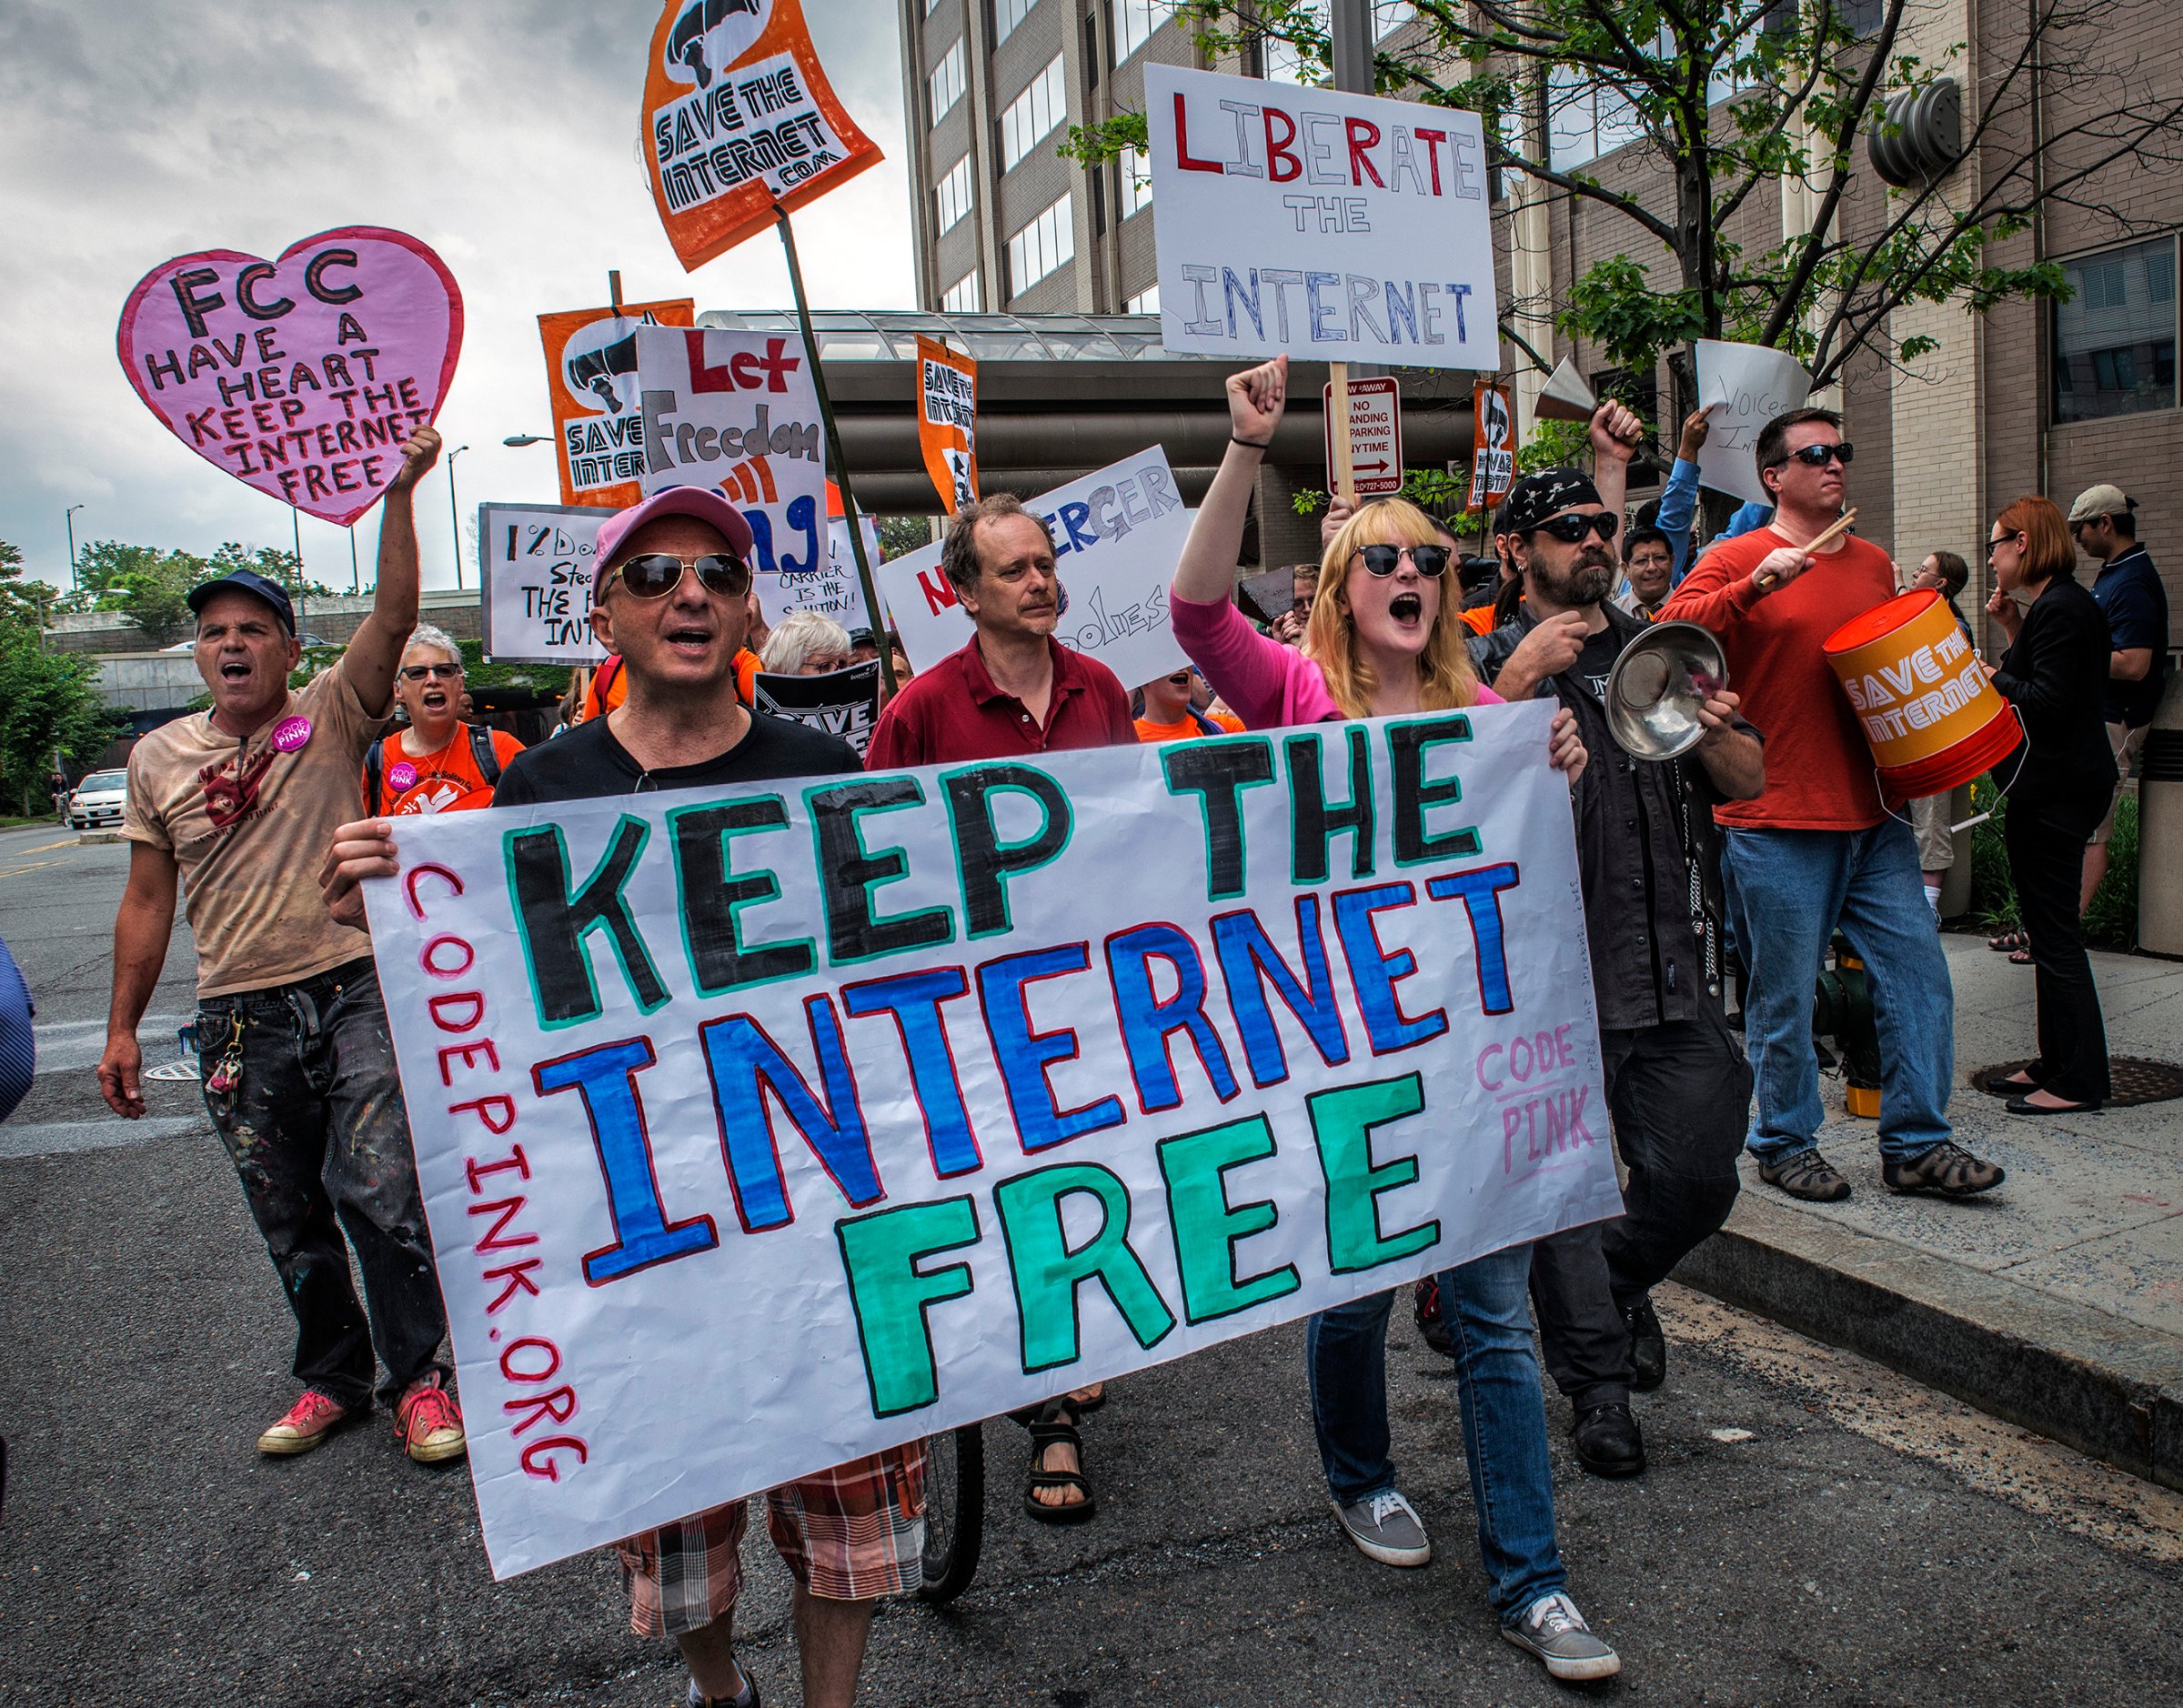 Protesters hold a rally before the FCC meeting on net neutrality proposal in Washington, DC.